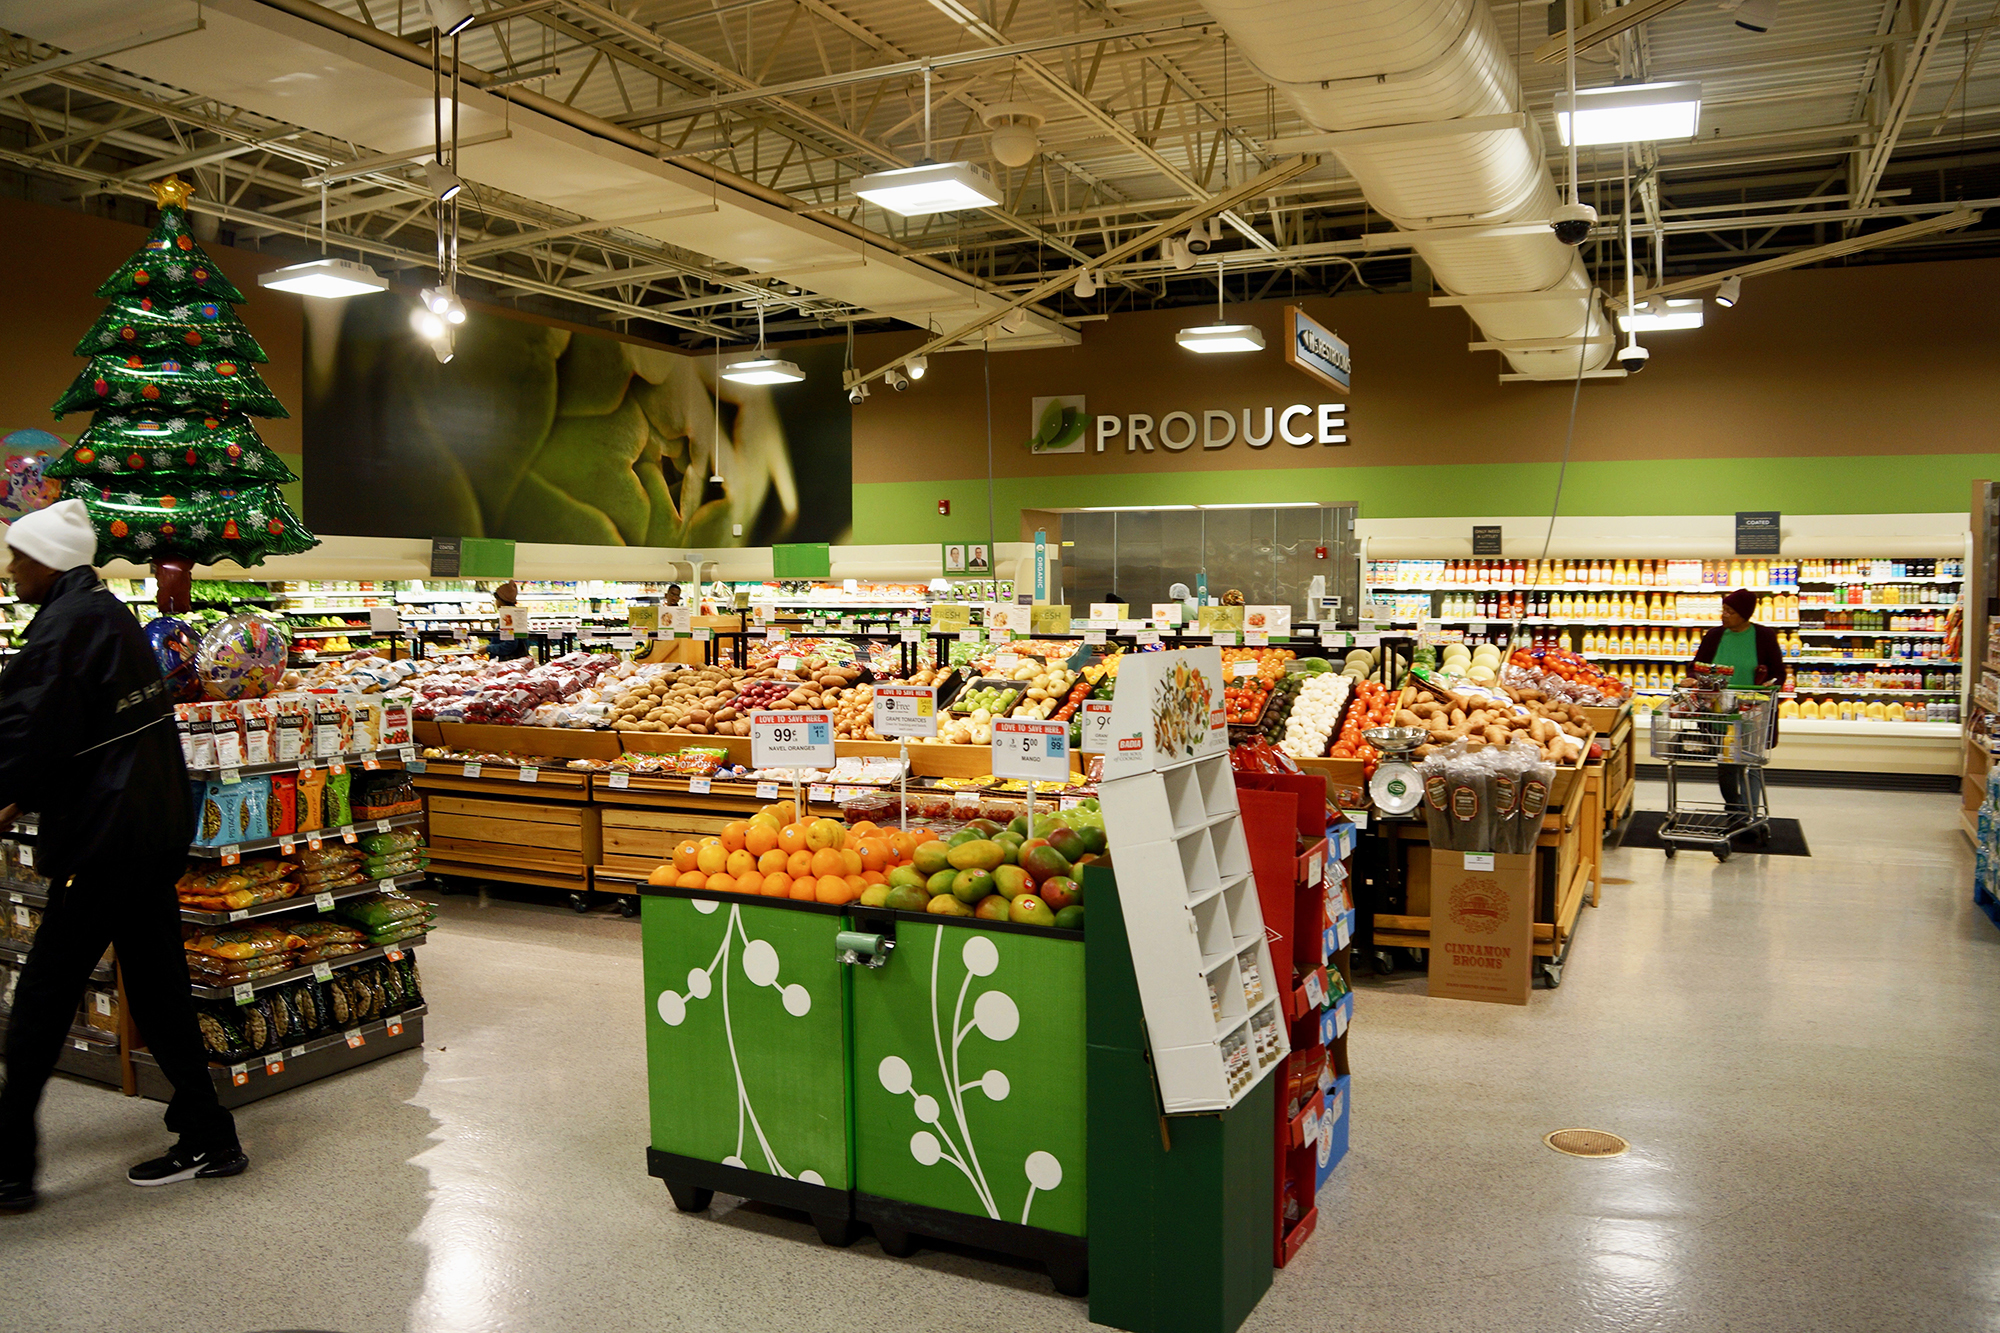 On Dec. 23, less than a week before its closing, the produce area at the Gateway Publix was fully stocked.